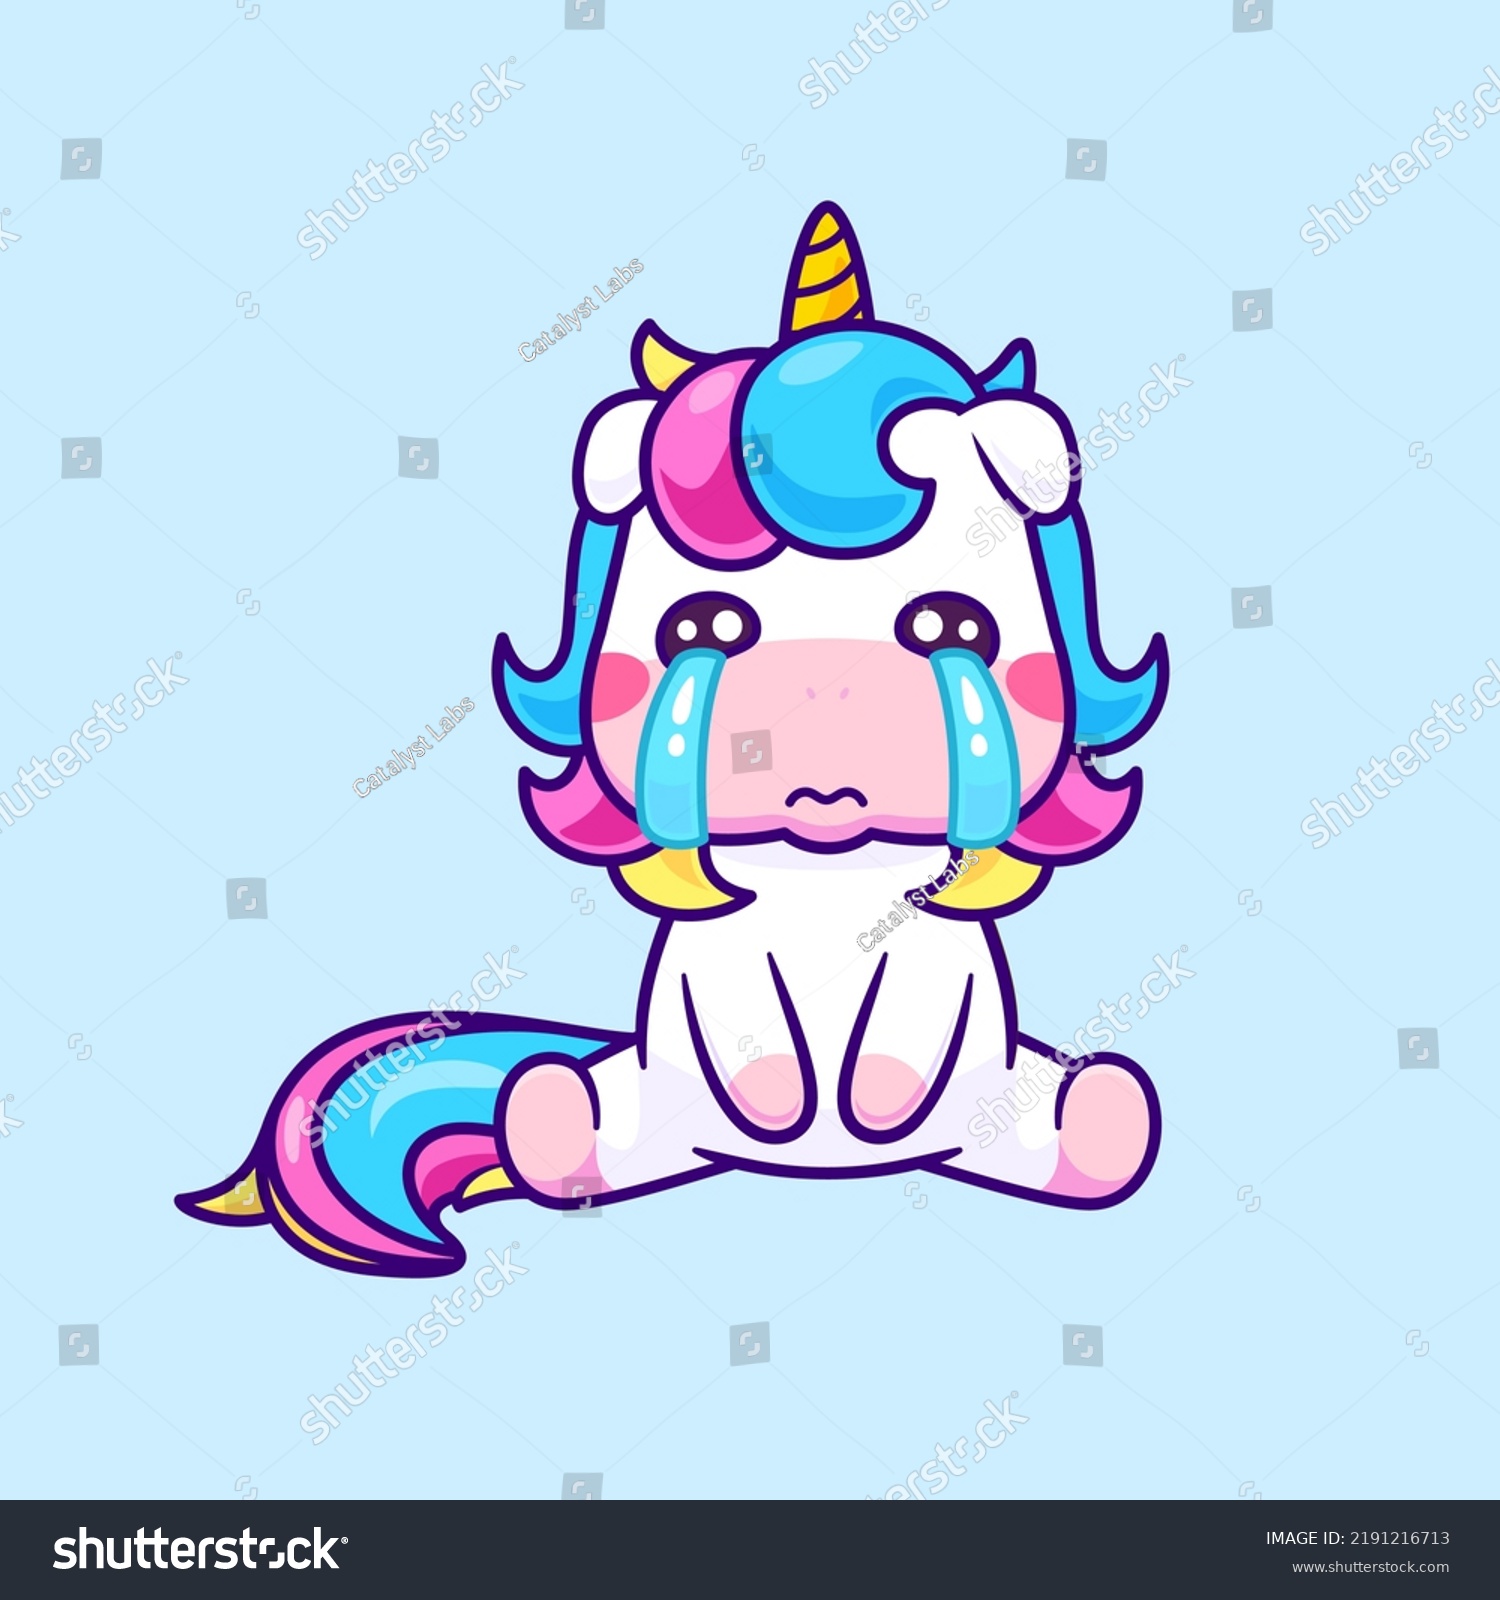 SVG of Cute Unicorn Crying Cartoon Vector Icon Illustration. Animal Nature Icon Concept Isolated Premium Vector. Flat Cartoon Style svg